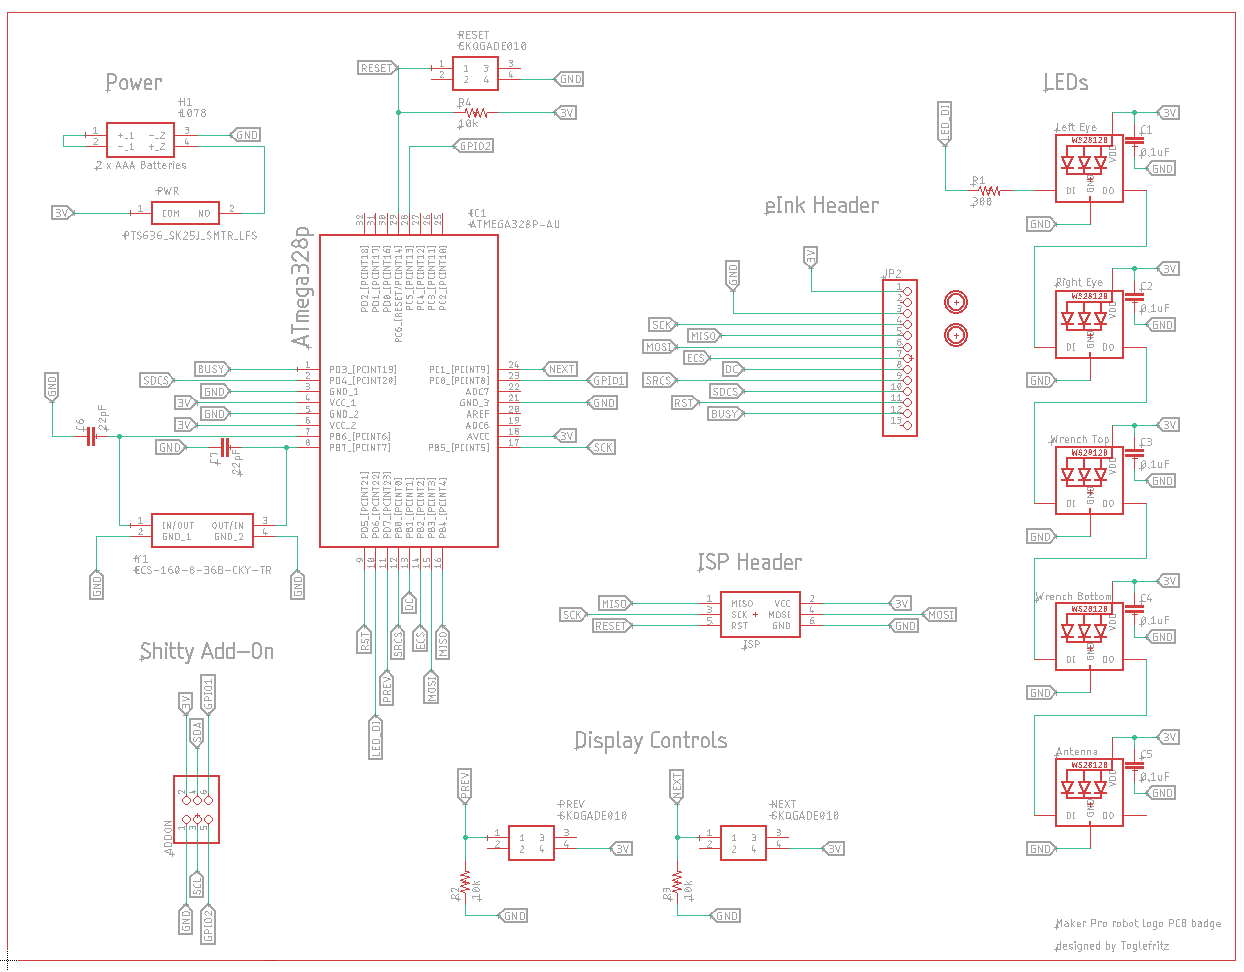 full maker pro robot page schematic